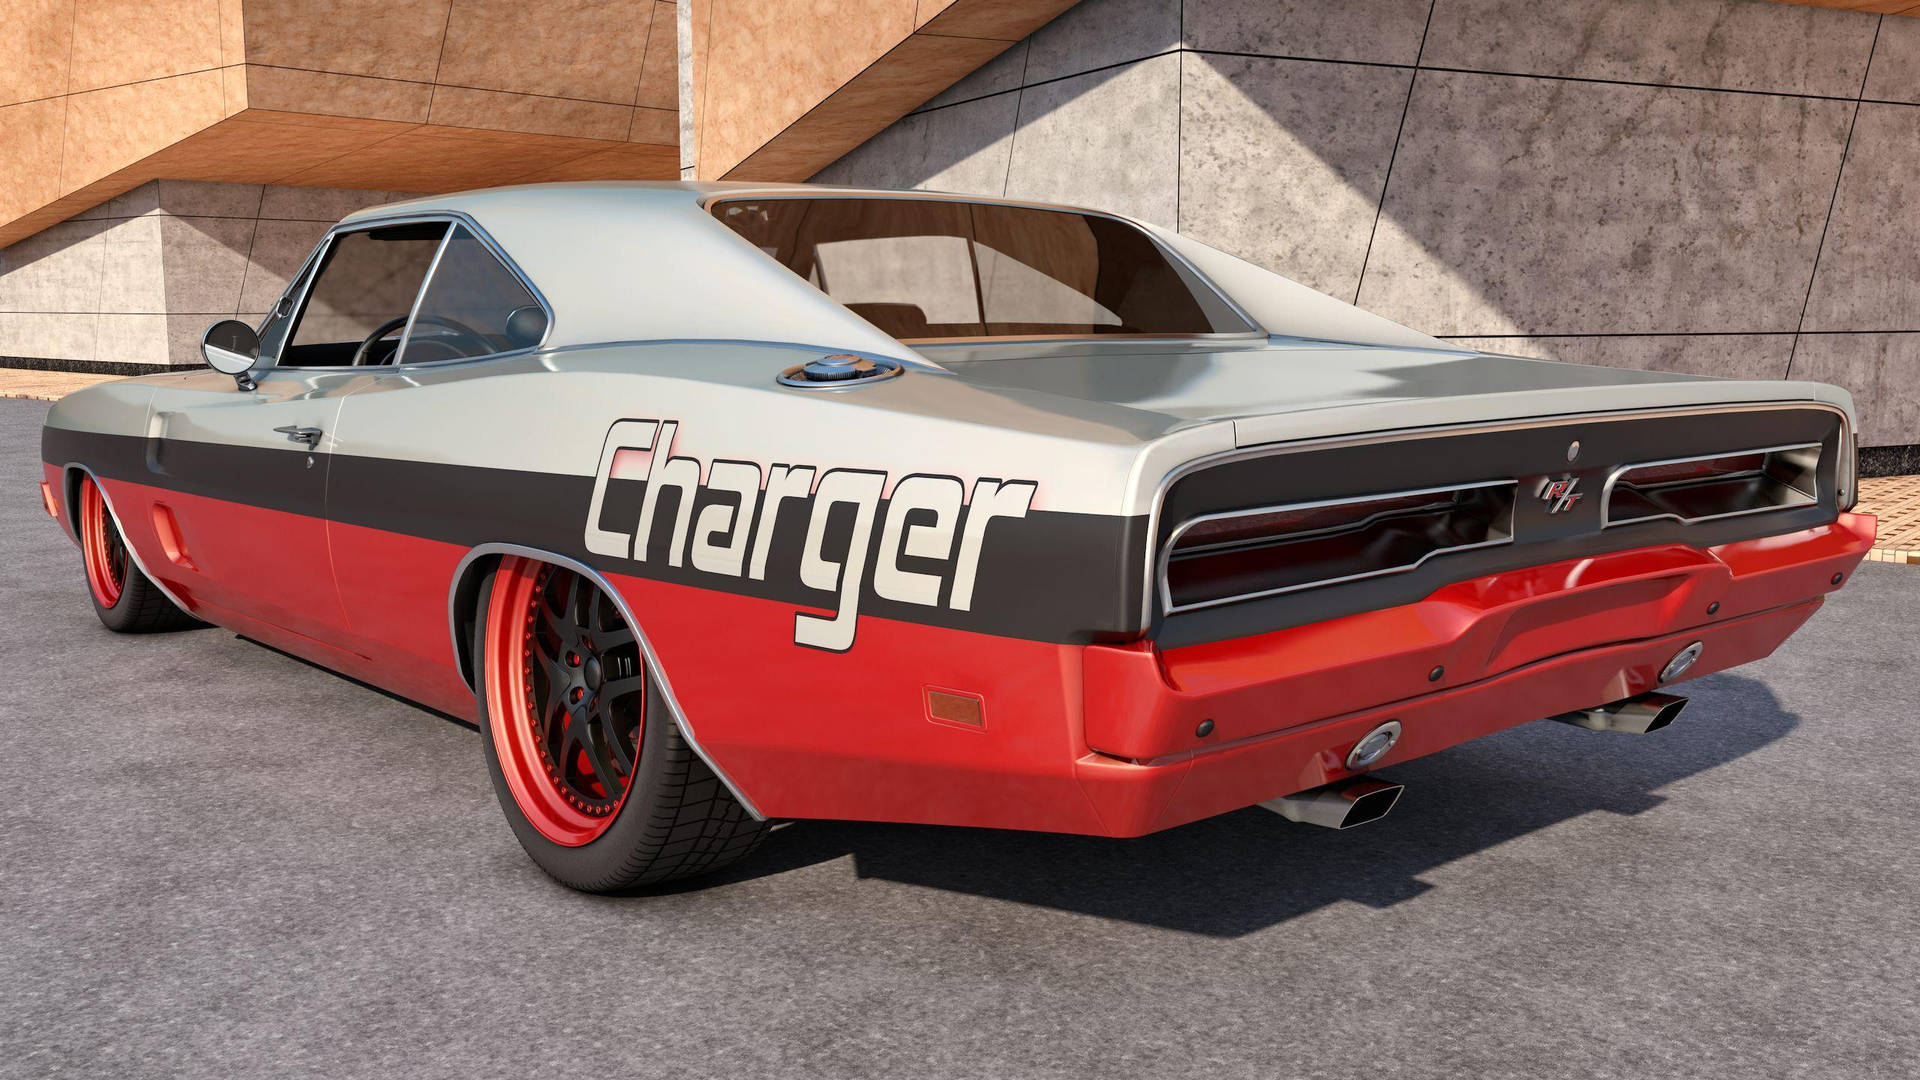 1969 Dodge Charger - Vintage American Muscle Car Wallpaper